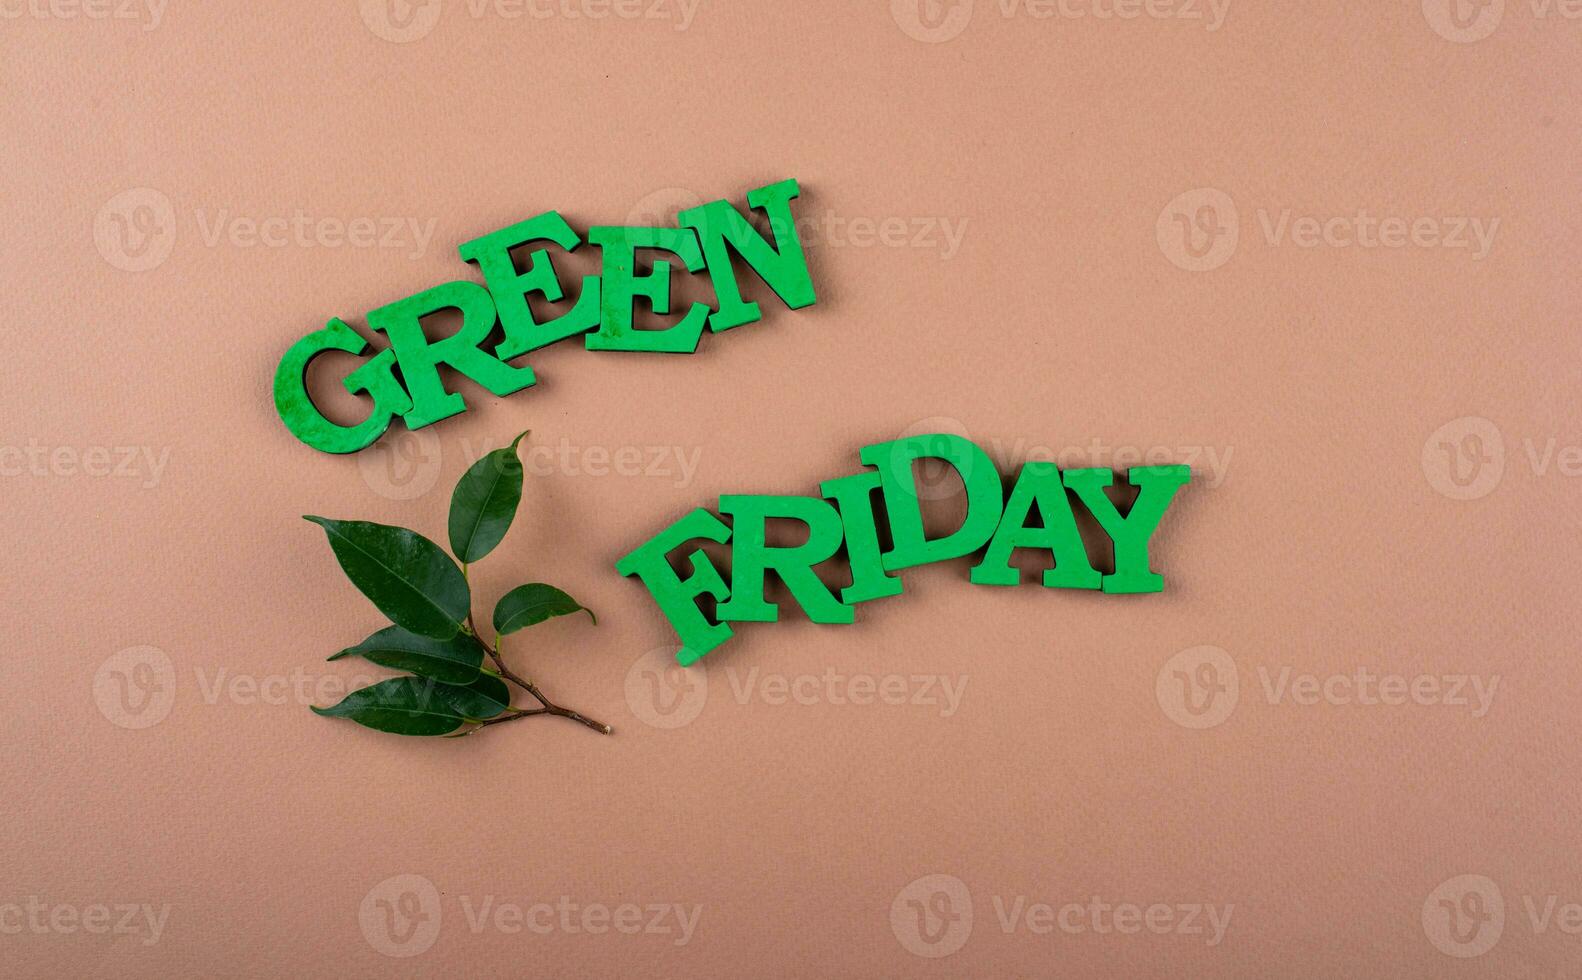 Green Friday eco friendly concept photo